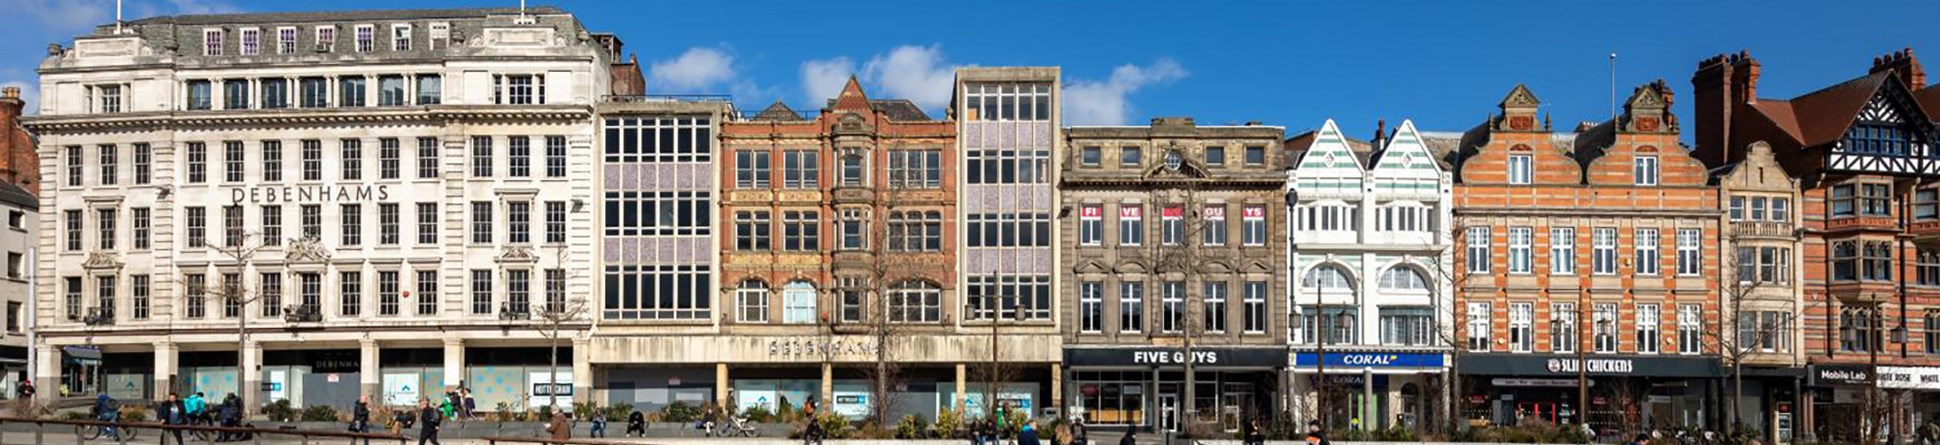 A series of historic shop fronts in a pedestrianised area of a city.